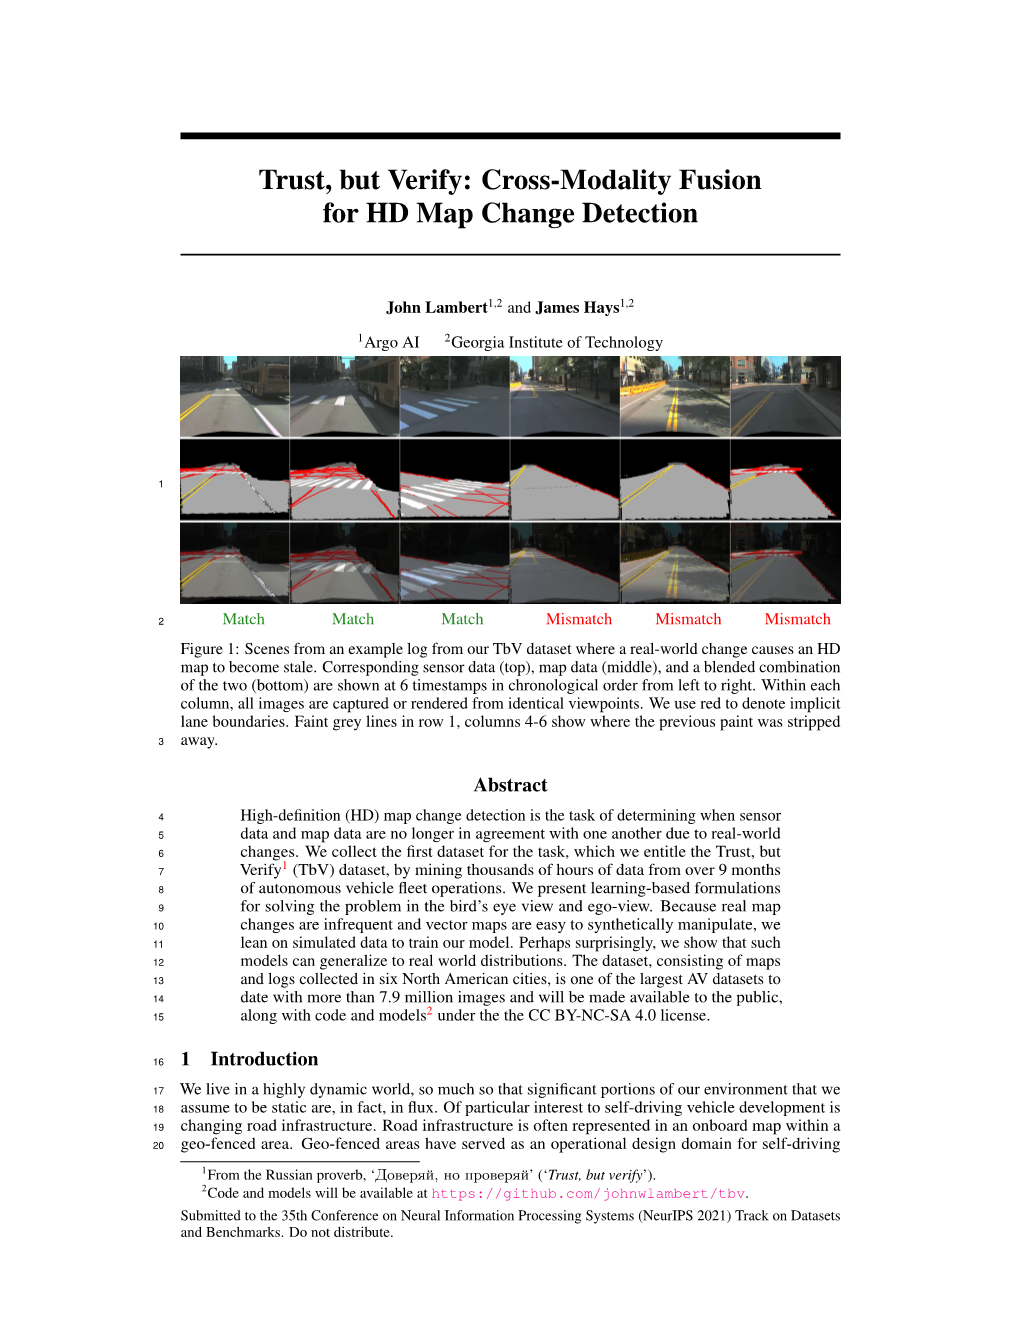 Trust, but Verify: Cross-Modality Fusion for HD Map Change Detection